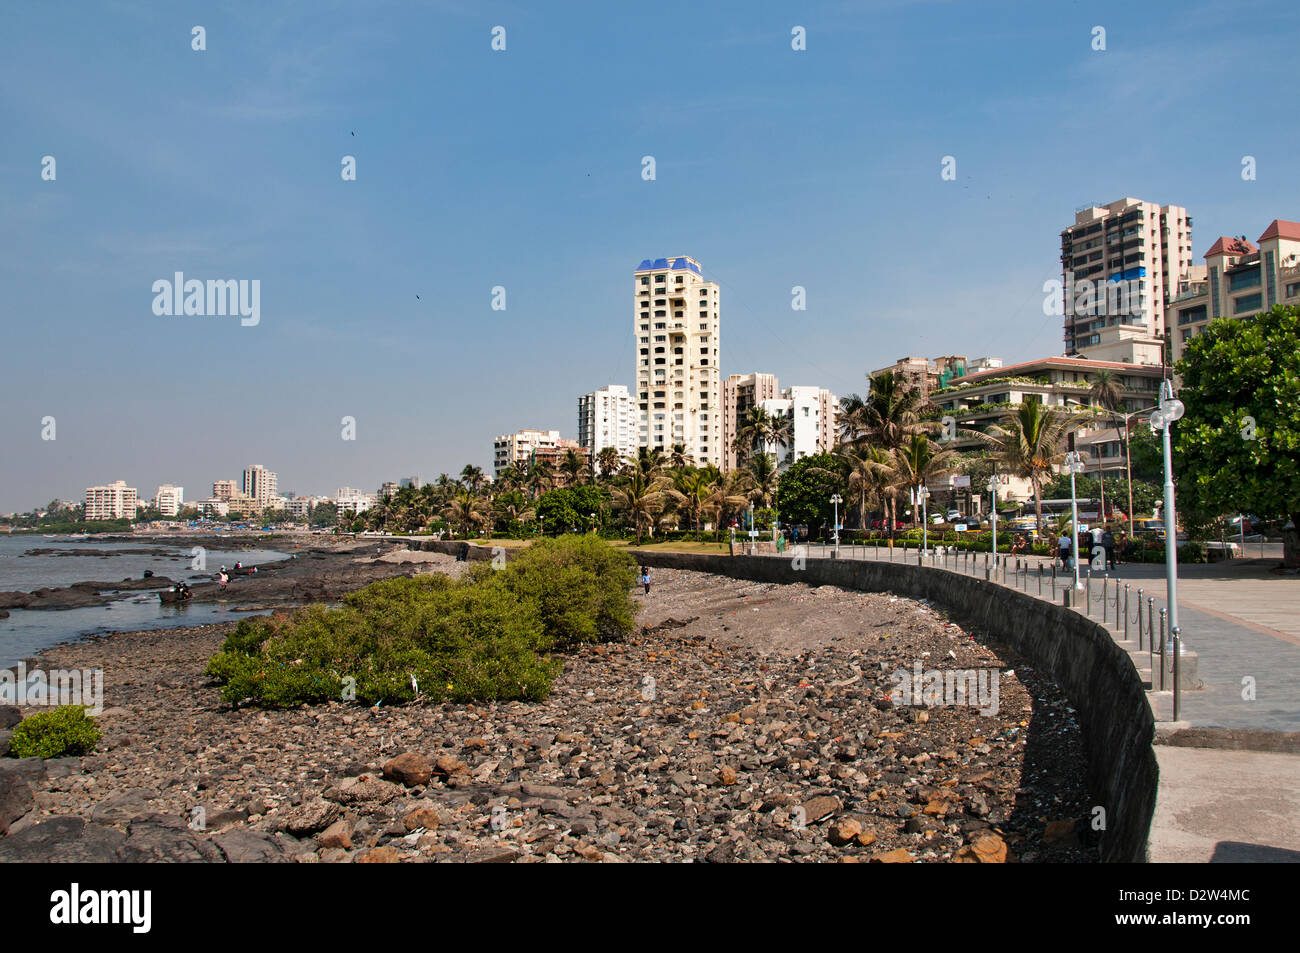 Le Bandra Beach road Mumbai ( Bombay ) Inde Architecture moderne Banque D'Images